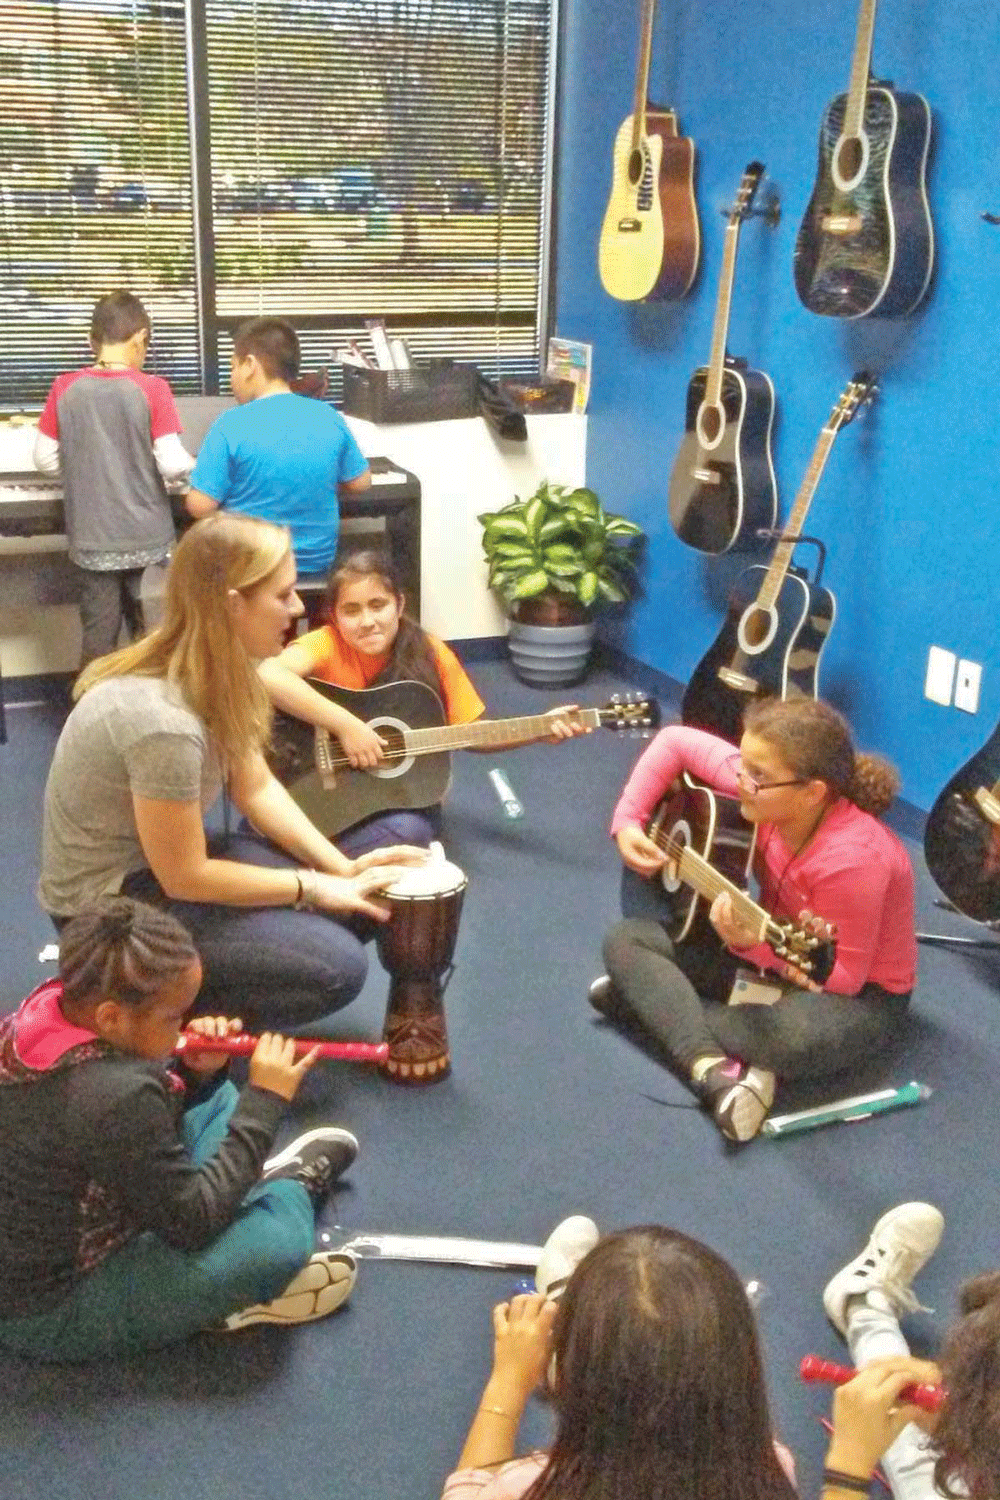 Music Appreciation program at INMED’s Opportunity Center in Sterling